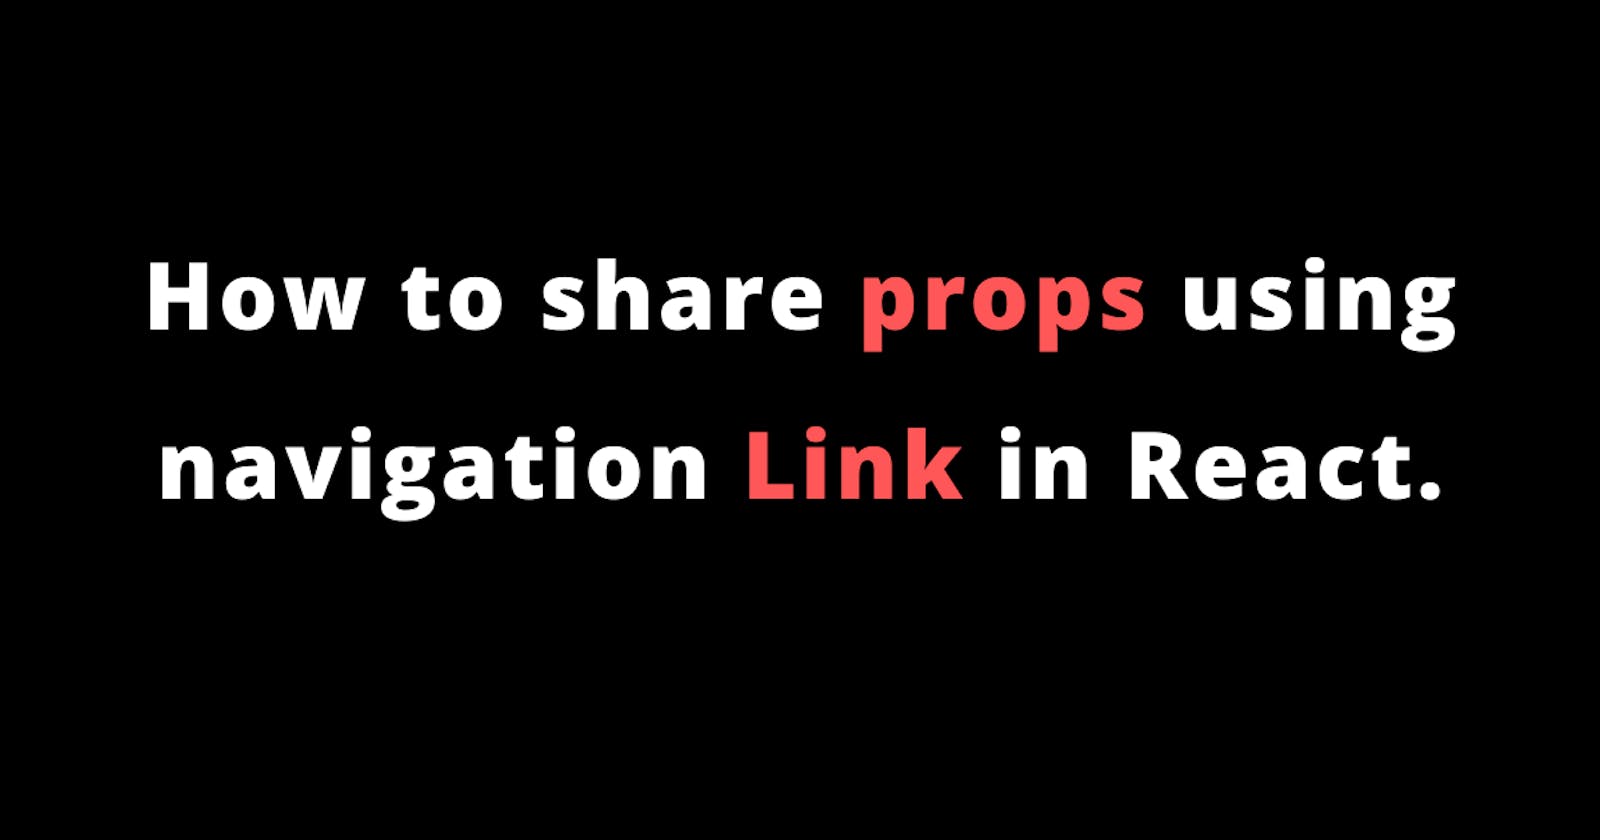 How to share props using navigation Link in React